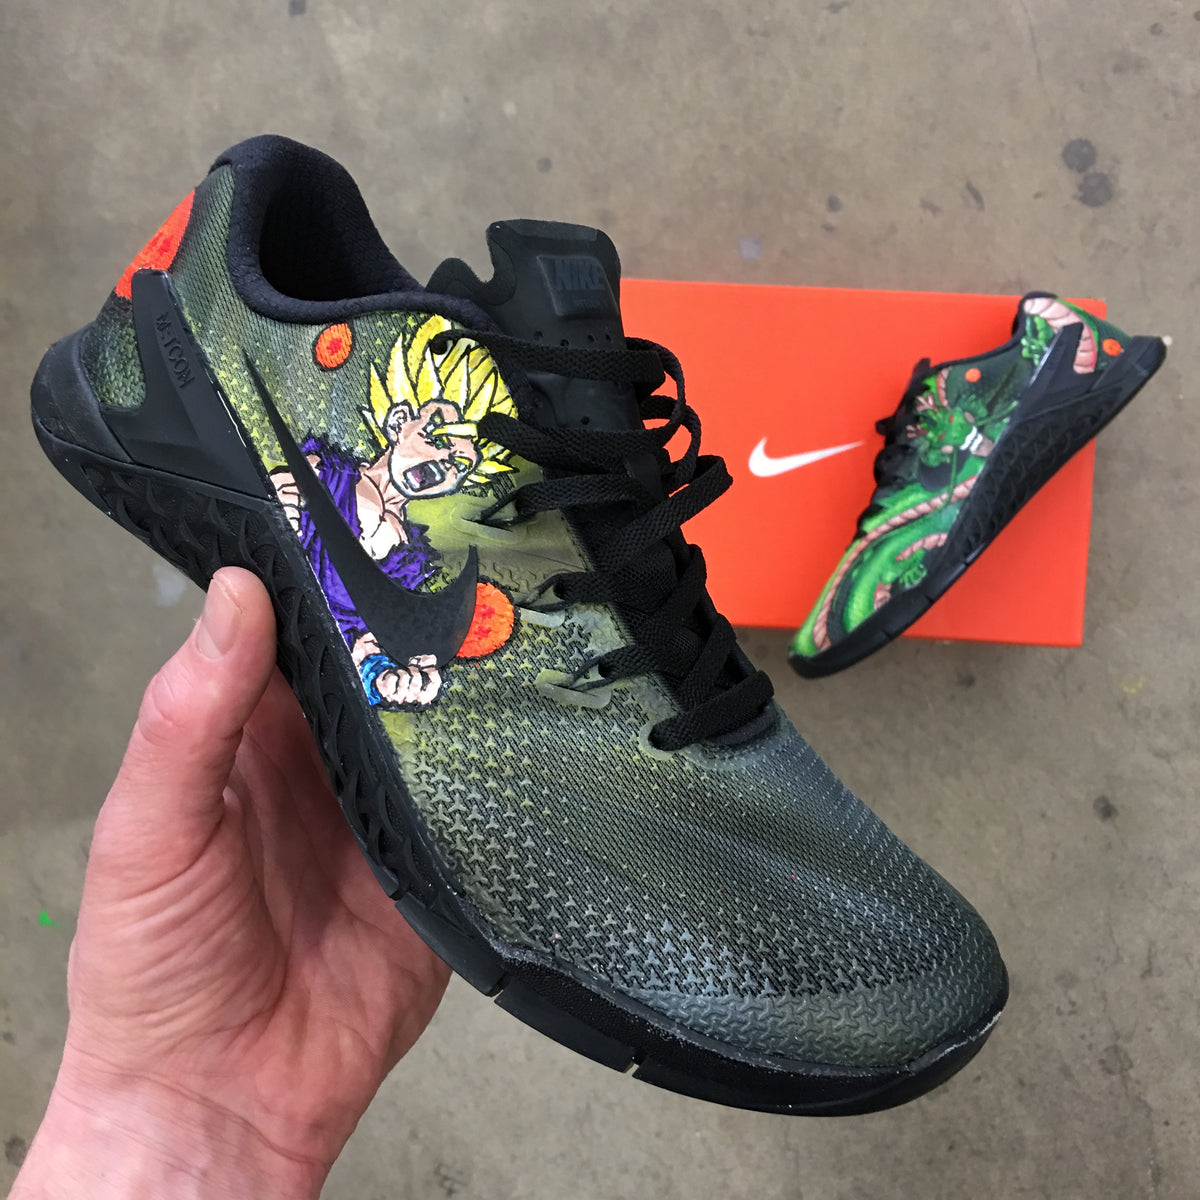 dragon ball z inspired shoes